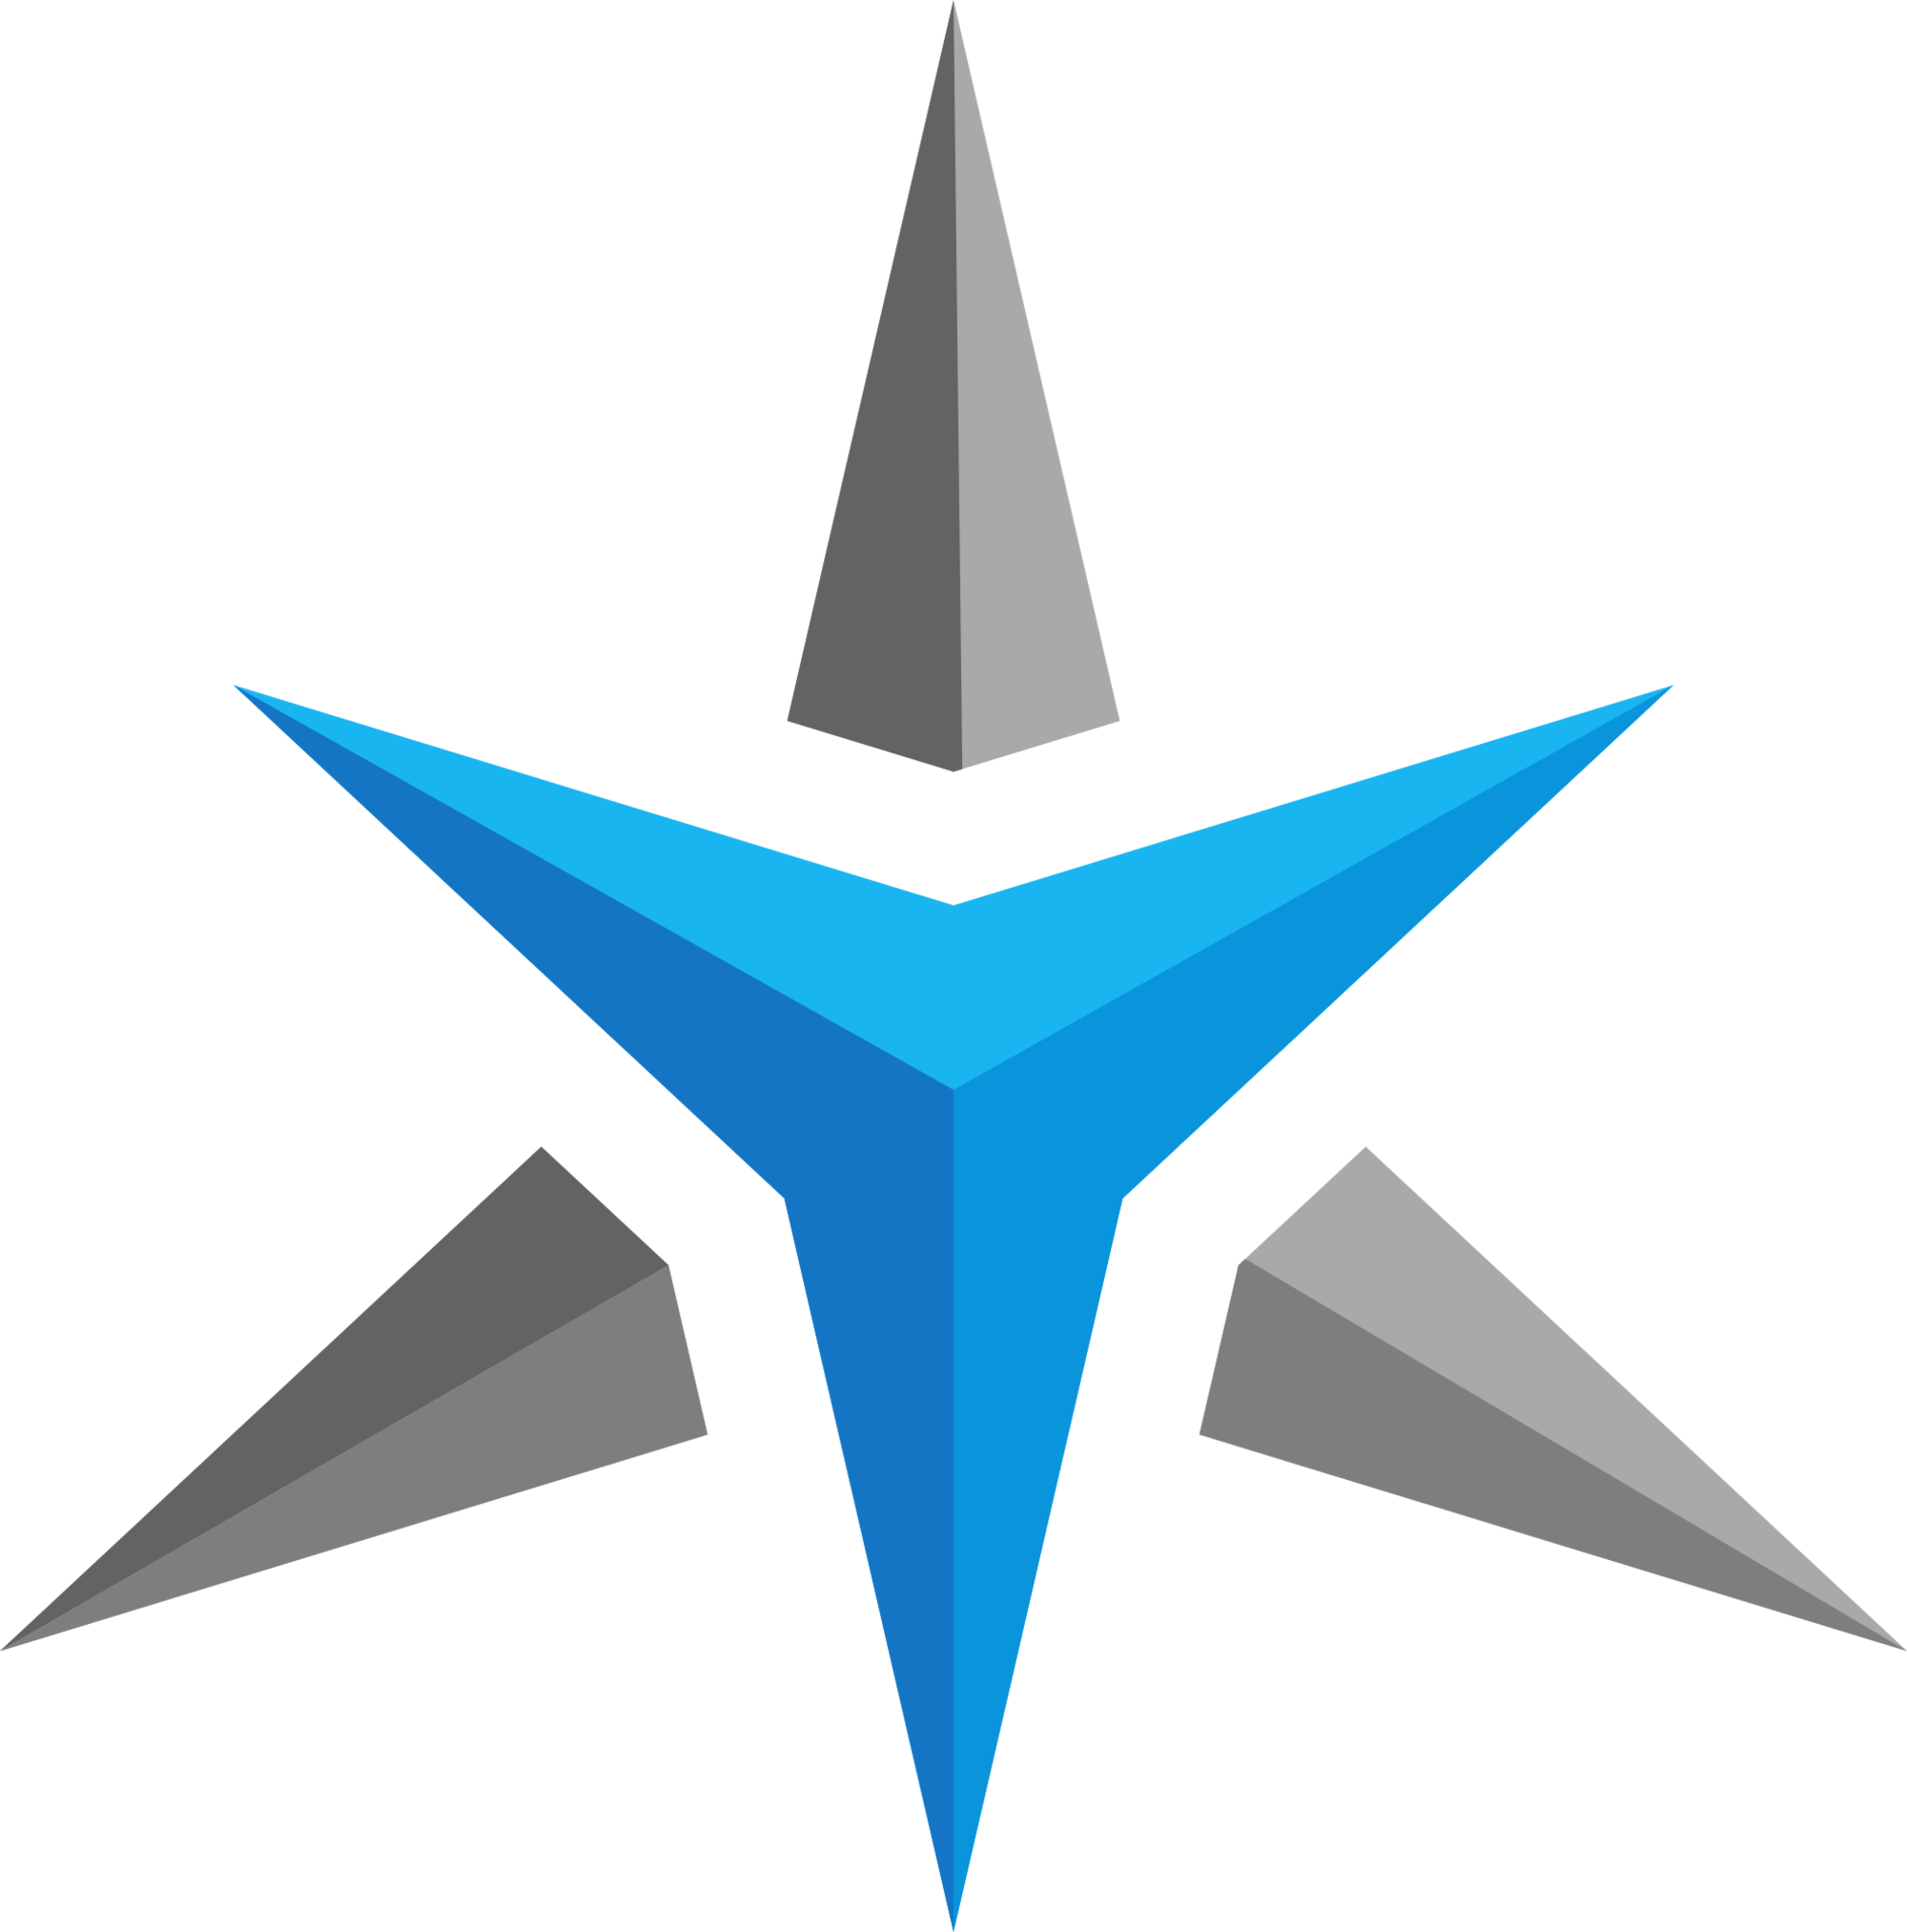 Logo used for Star Labs Systems branding